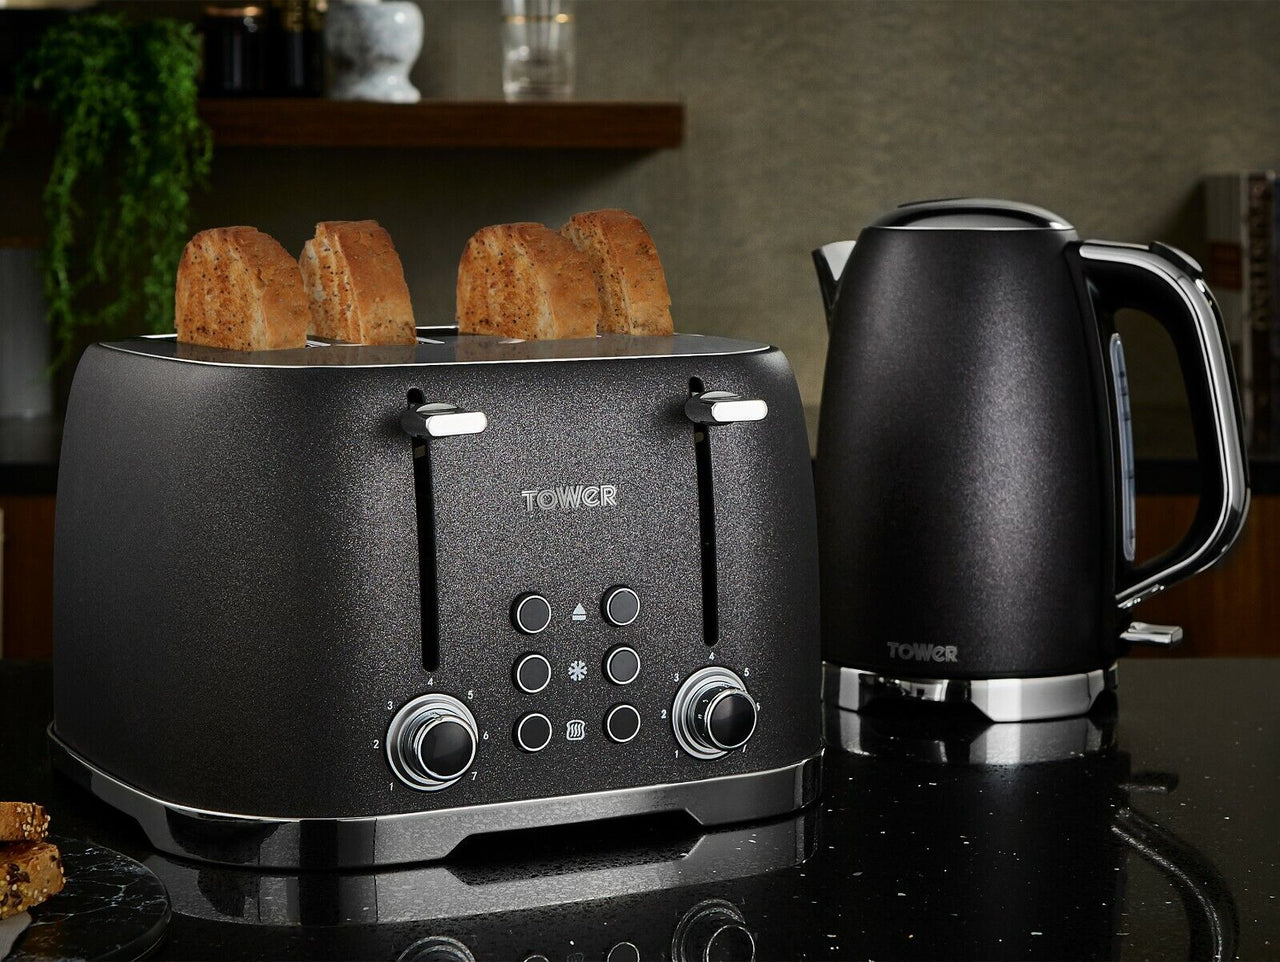 Tower Glitz Noir Kettle 4 Slice Toaster Microwave & Canisters Kitchen Set of 7